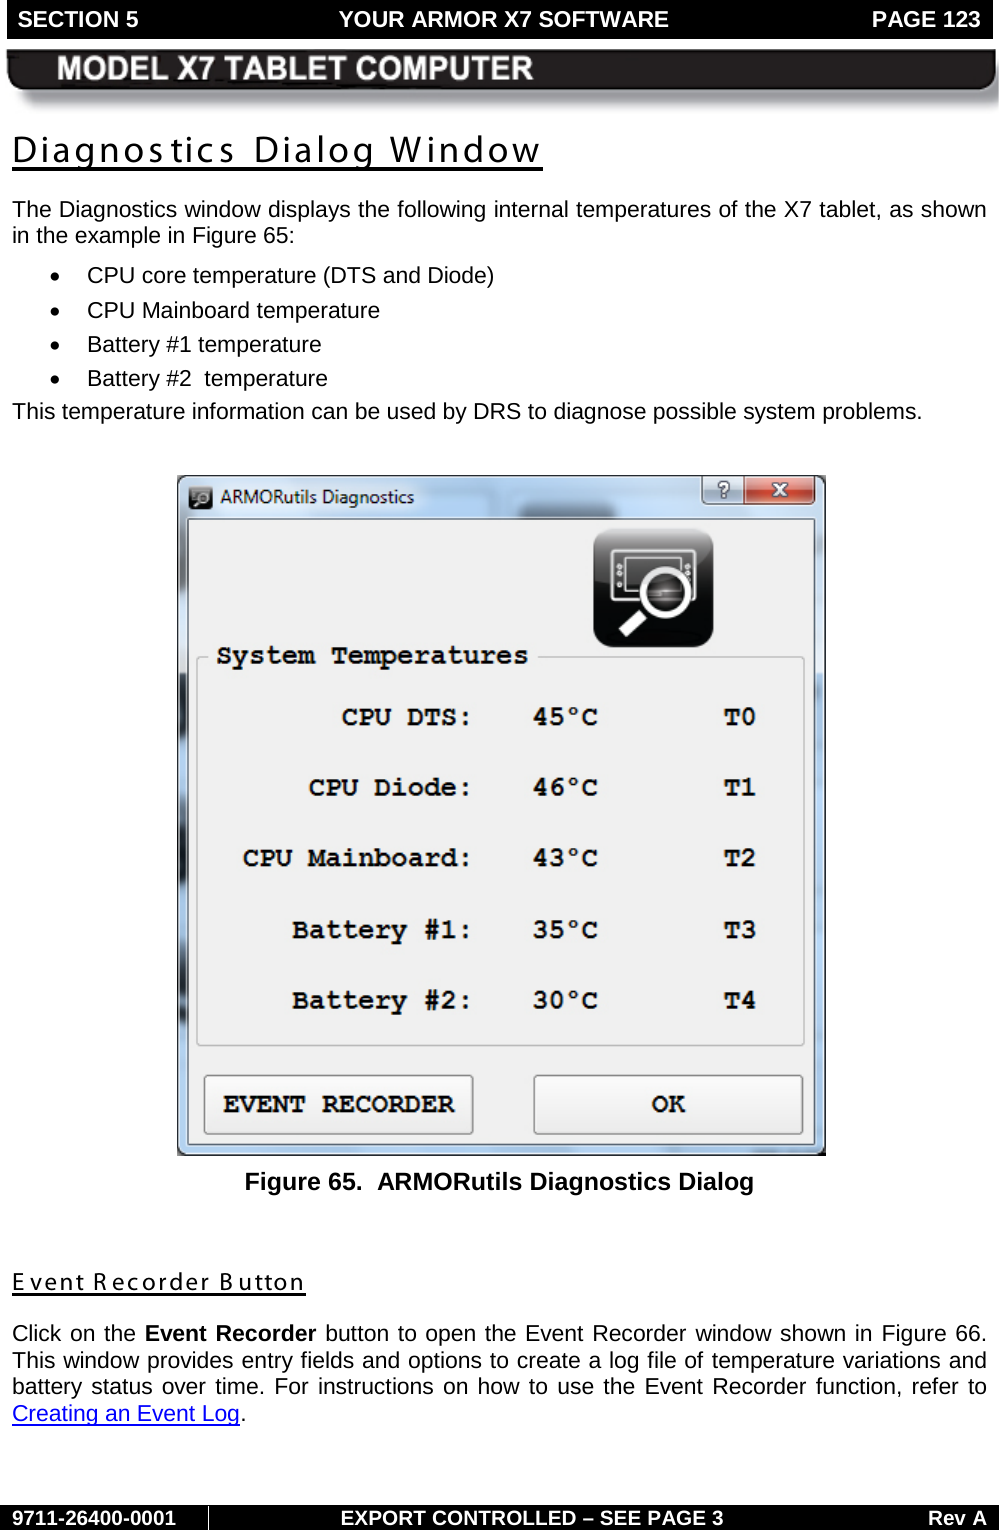 SECTION 5 YOUR ARMOR X7 SOFTWARE  PAGE 123        9711-26400-0001 EXPORT CONTROLLED – SEE PAGE 3 Rev A Diagnostics Dialog Window The Diagnostics window displays the following internal temperatures of the X7 tablet, as shown in the example in Figure 65: • CPU core temperature (DTS and Diode) • CPU Mainboard temperature • Battery #1 temperature  • Battery #2  temperature This temperature information can be used by DRS to diagnose possible system problems.   Figure 65.  ARMORutils Diagnostics Dialog  E vent Recorder B utton Click on the Event Recorder button to open the Event Recorder window shown in Figure 66. This window provides entry fields and options to create a log file of temperature variations and battery status over time. For instructions on how to use the Event Recorder function, refer to Creating an Event Log.   